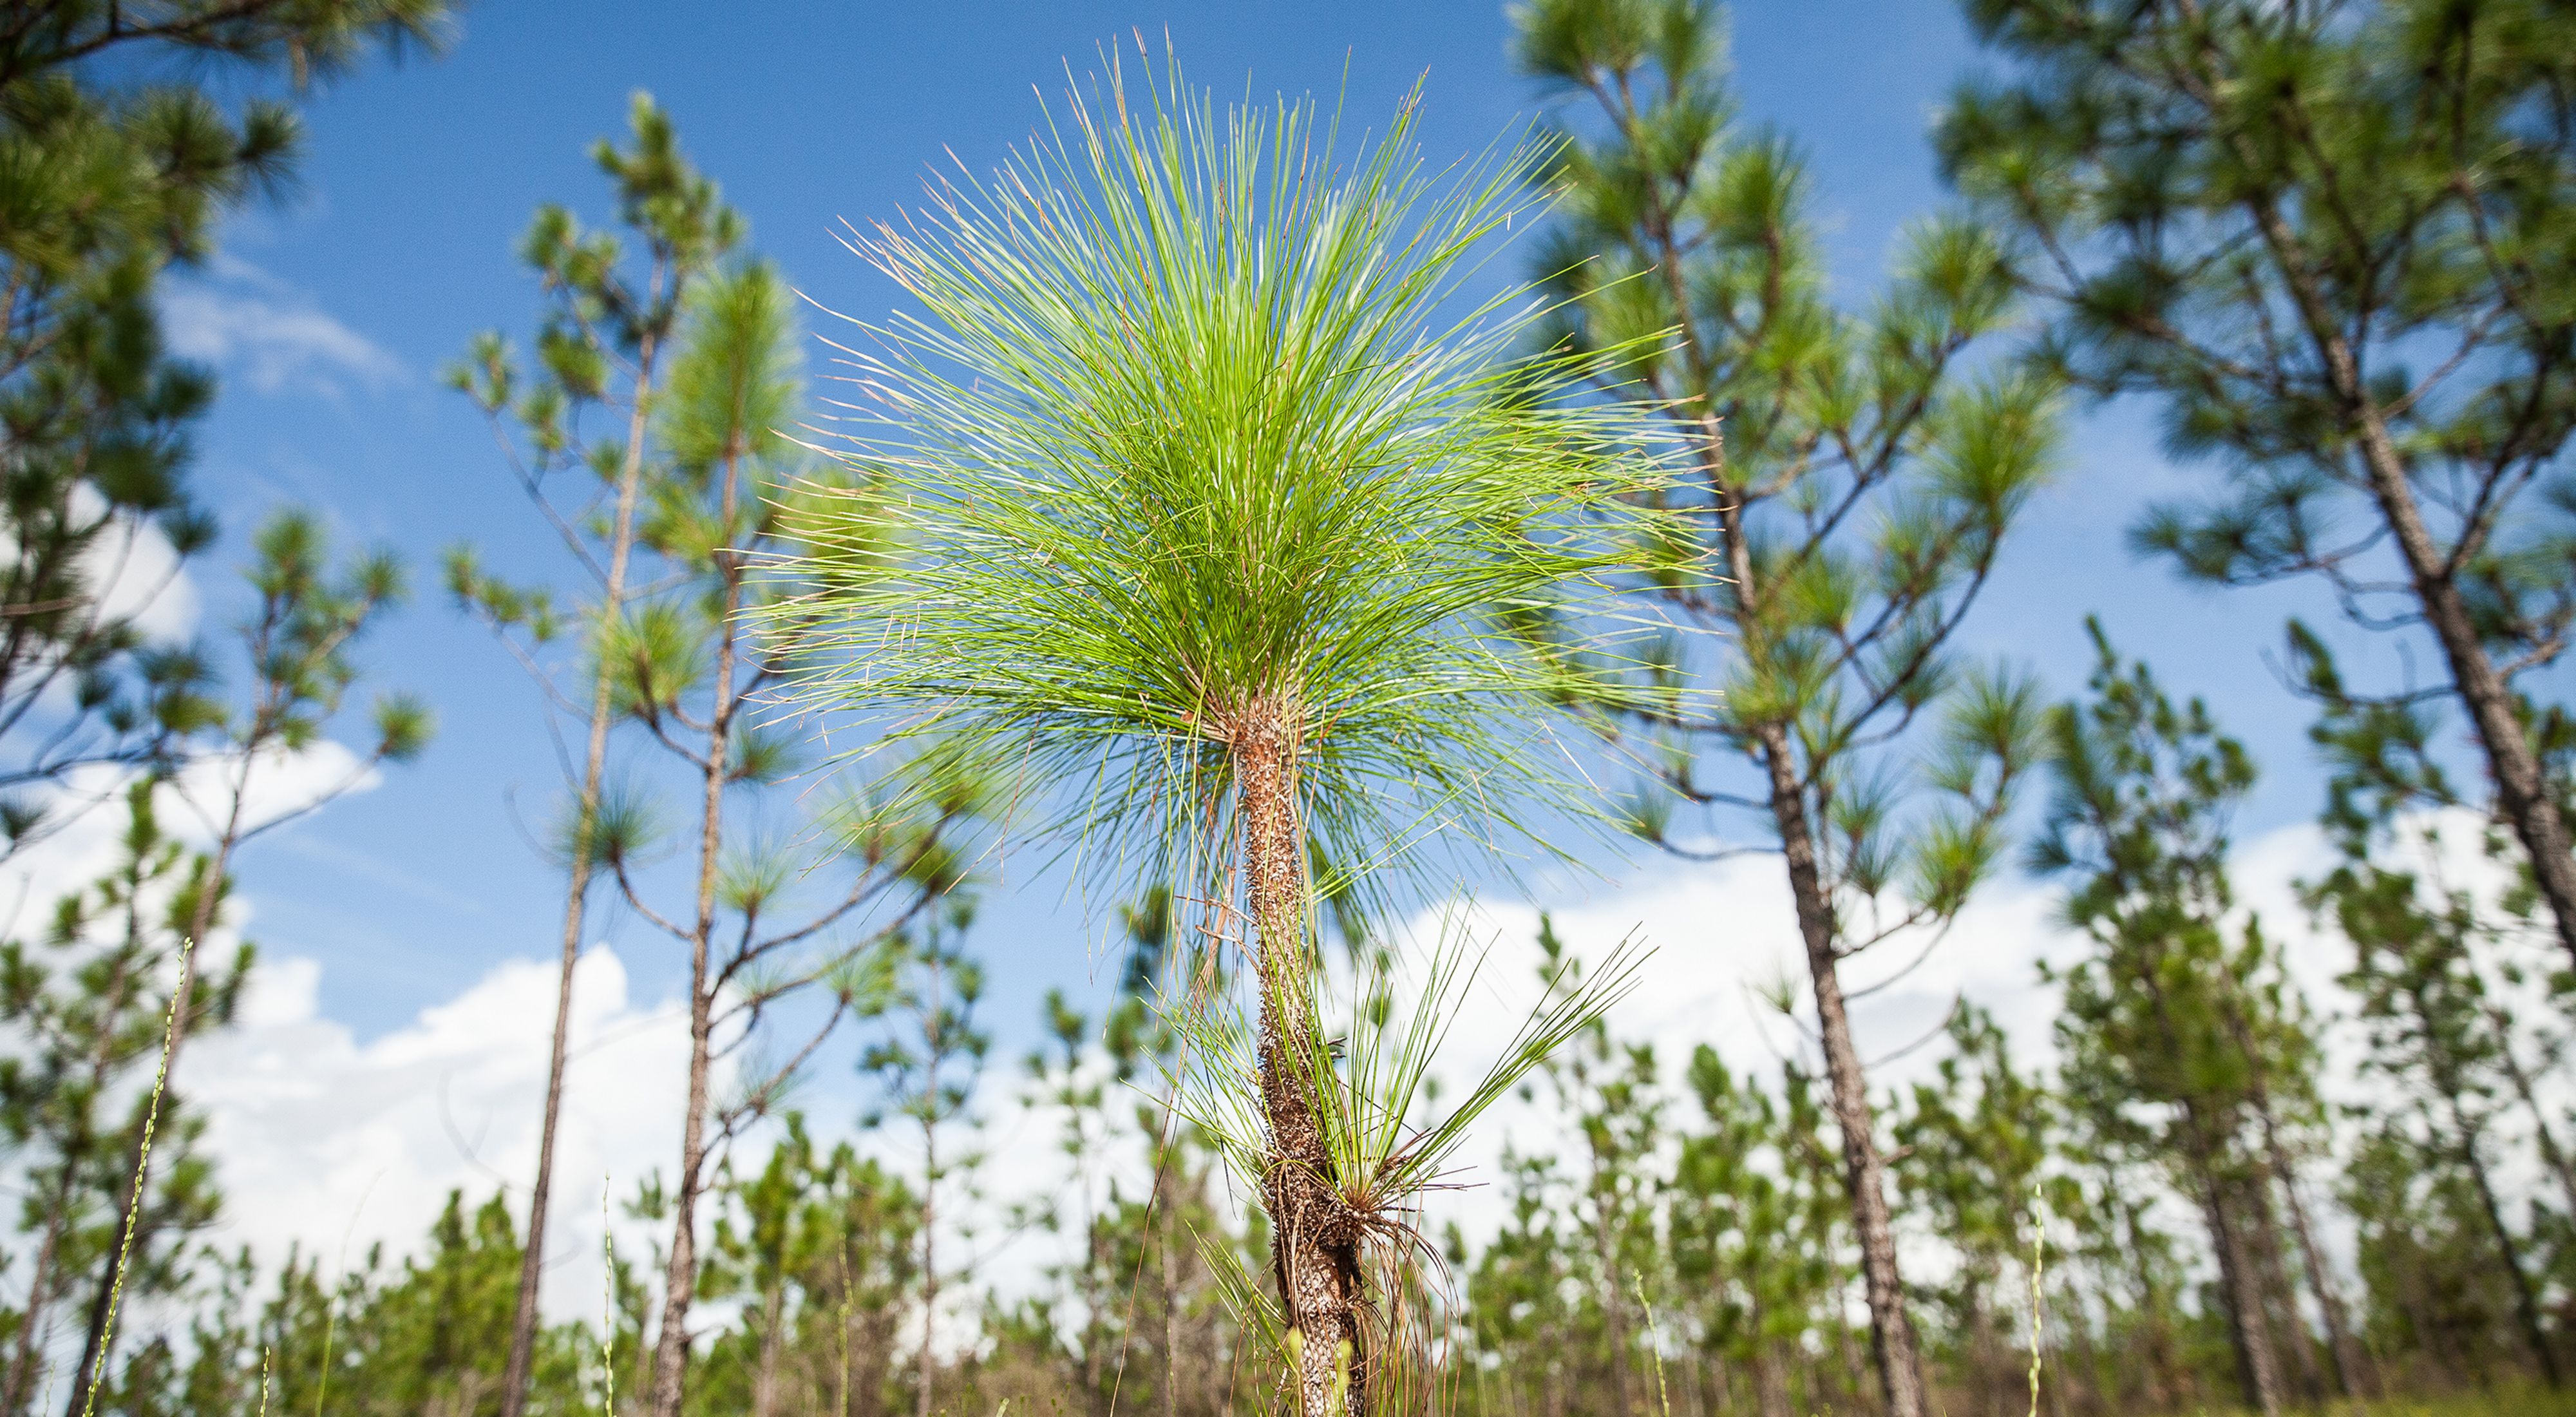 pine tree seedling seen from ground level in a pine forest under blue sky